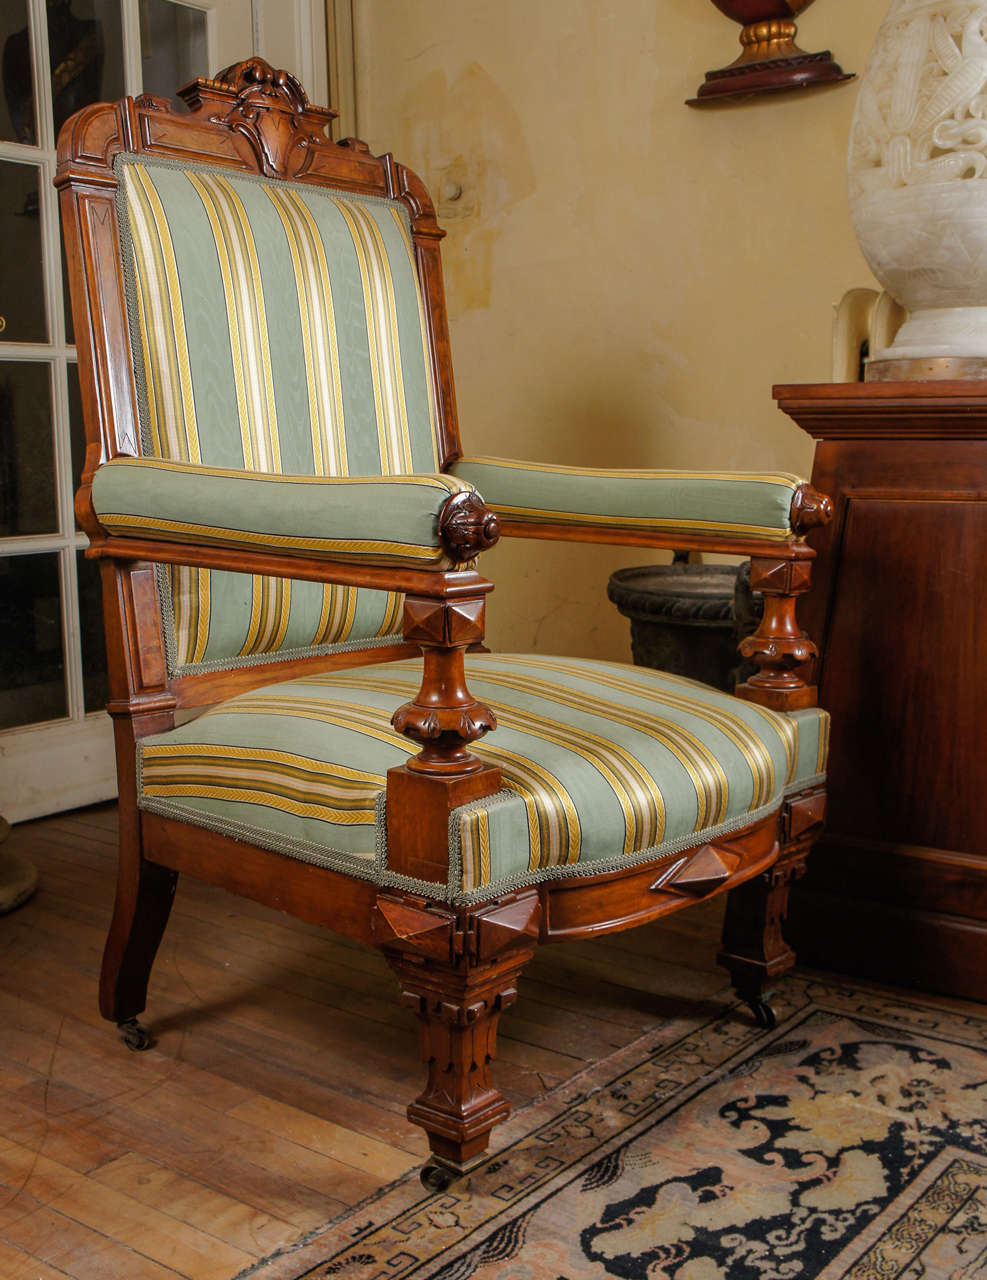 This large-scale and masculine chair made in America circa 1860 was crafted in walnut and fine walnut figured veneers. The large flat plains are accentuated with figured veneers set within ebonized incised lines. The leg supports and lower apron are